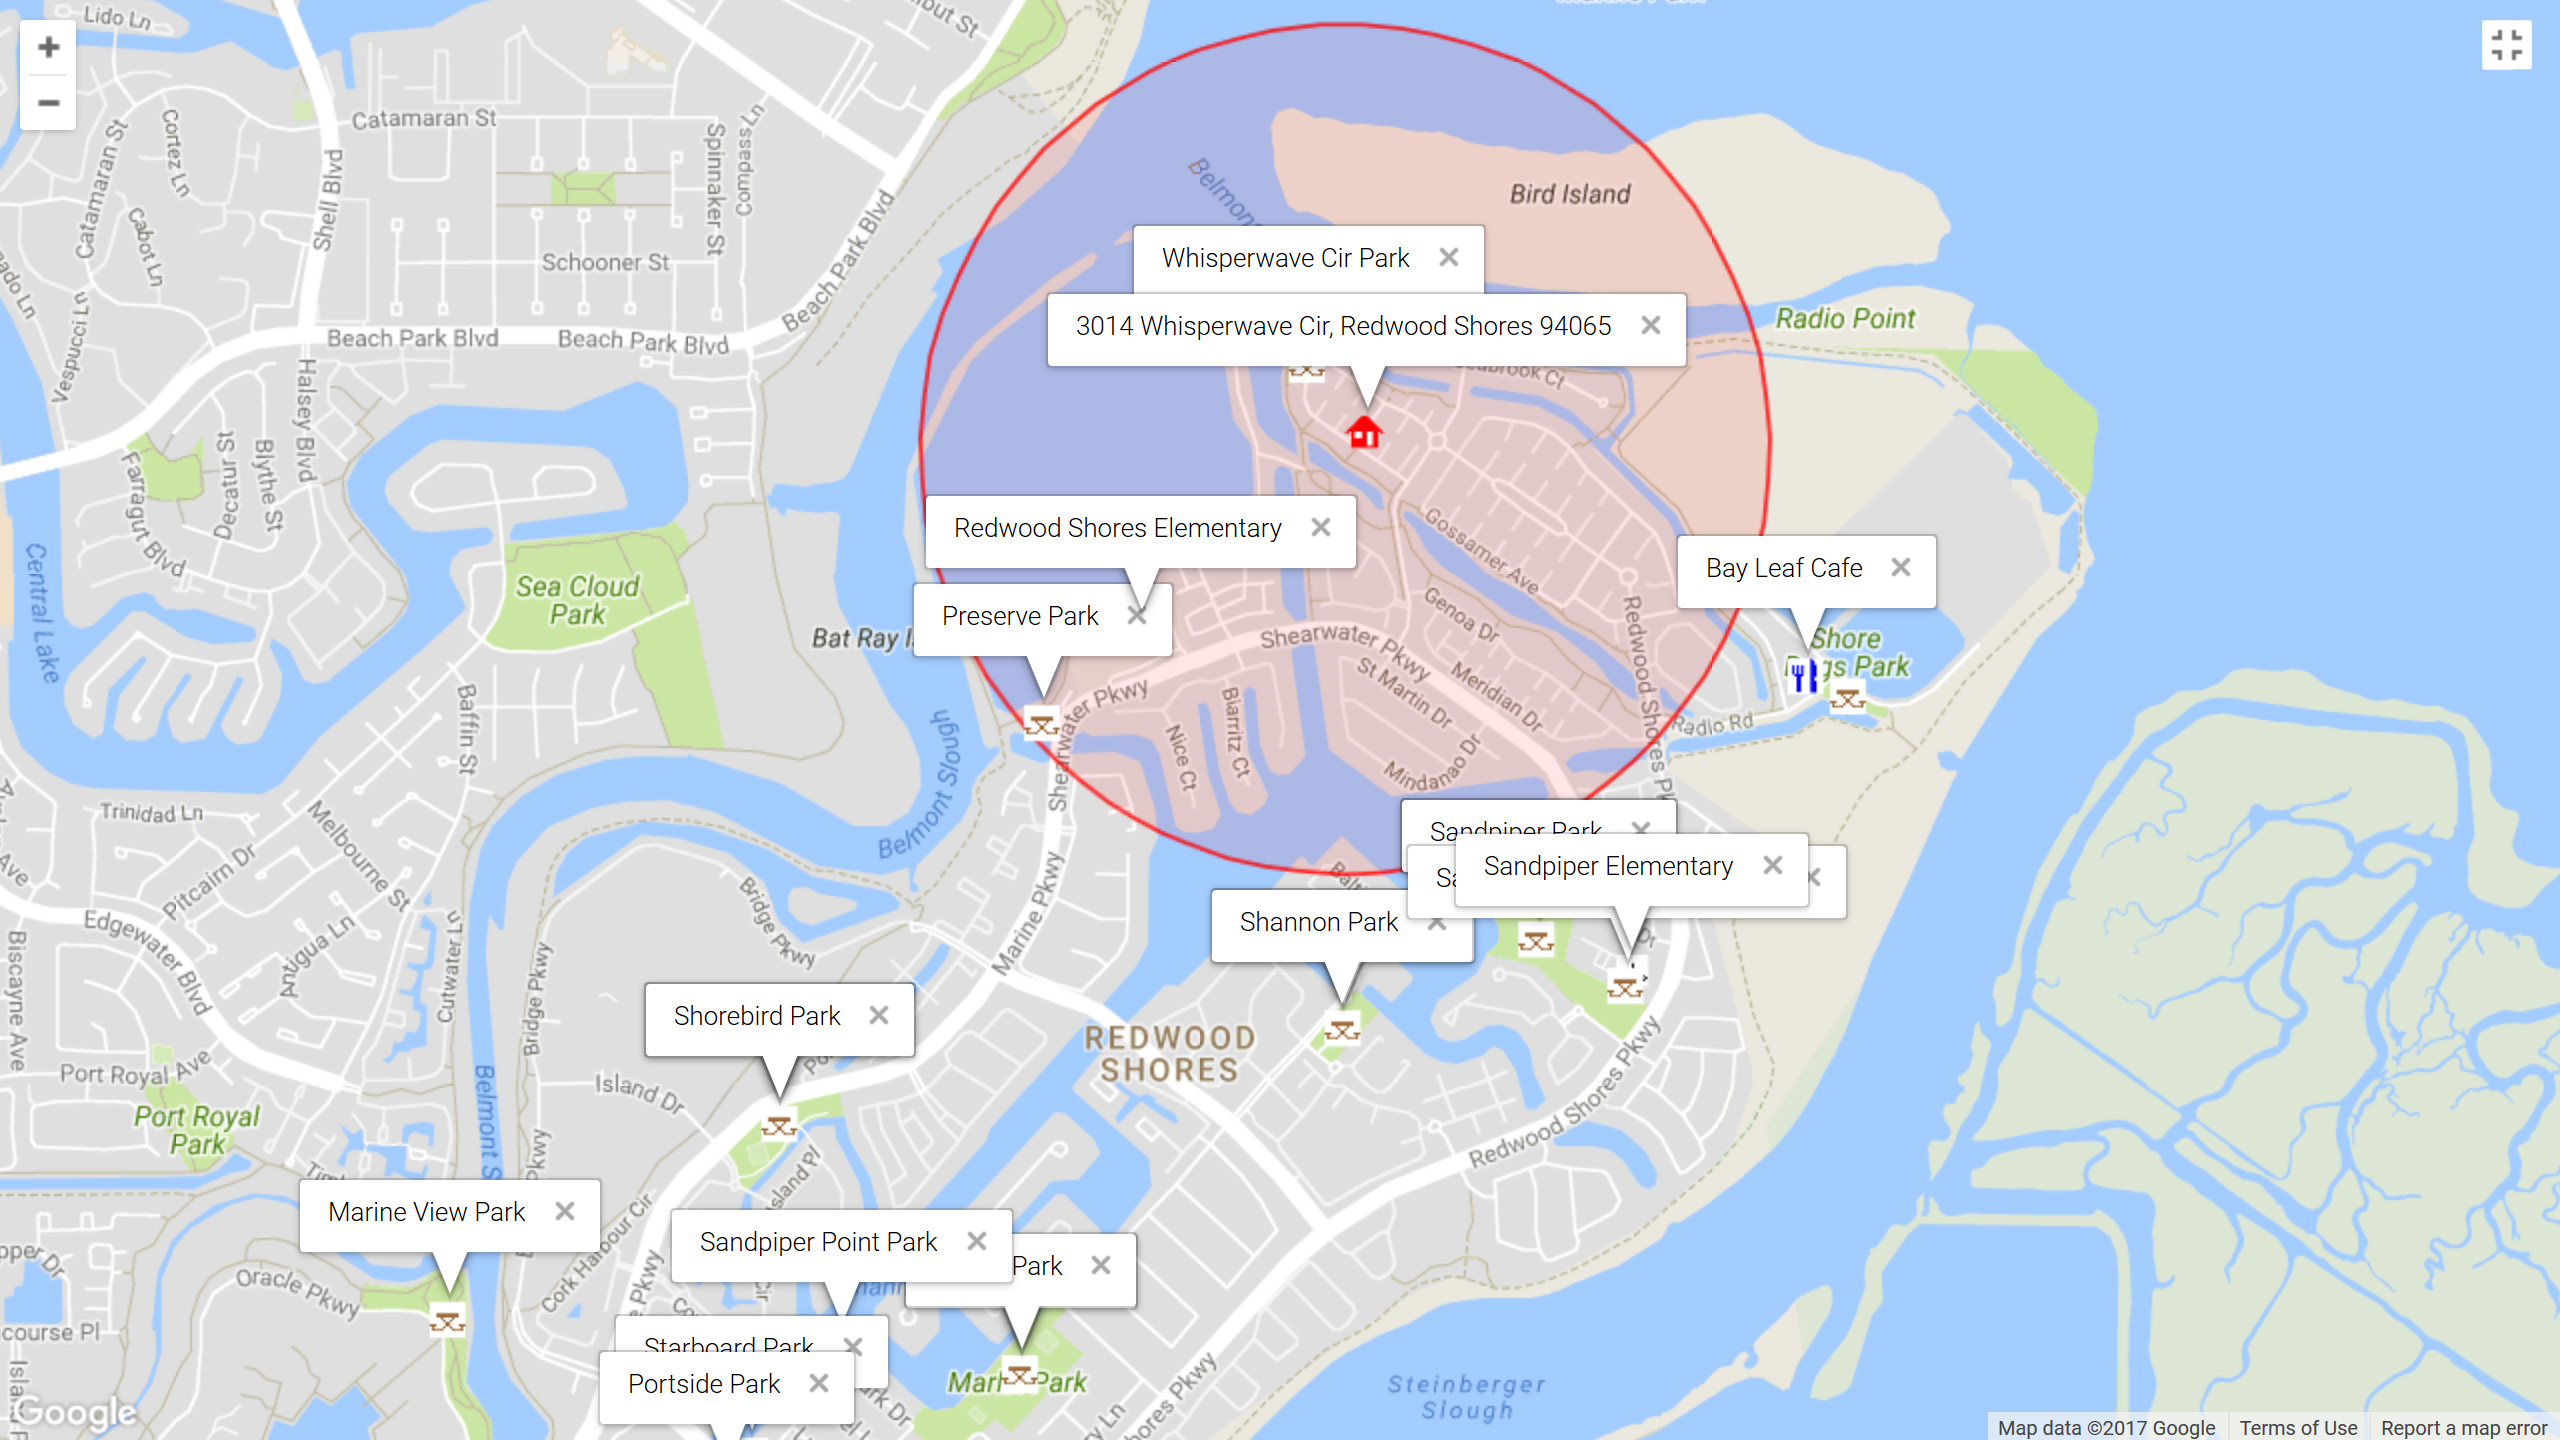 Map of attractions near 3014 Whisperwave Cir, Redwood Shores 94065